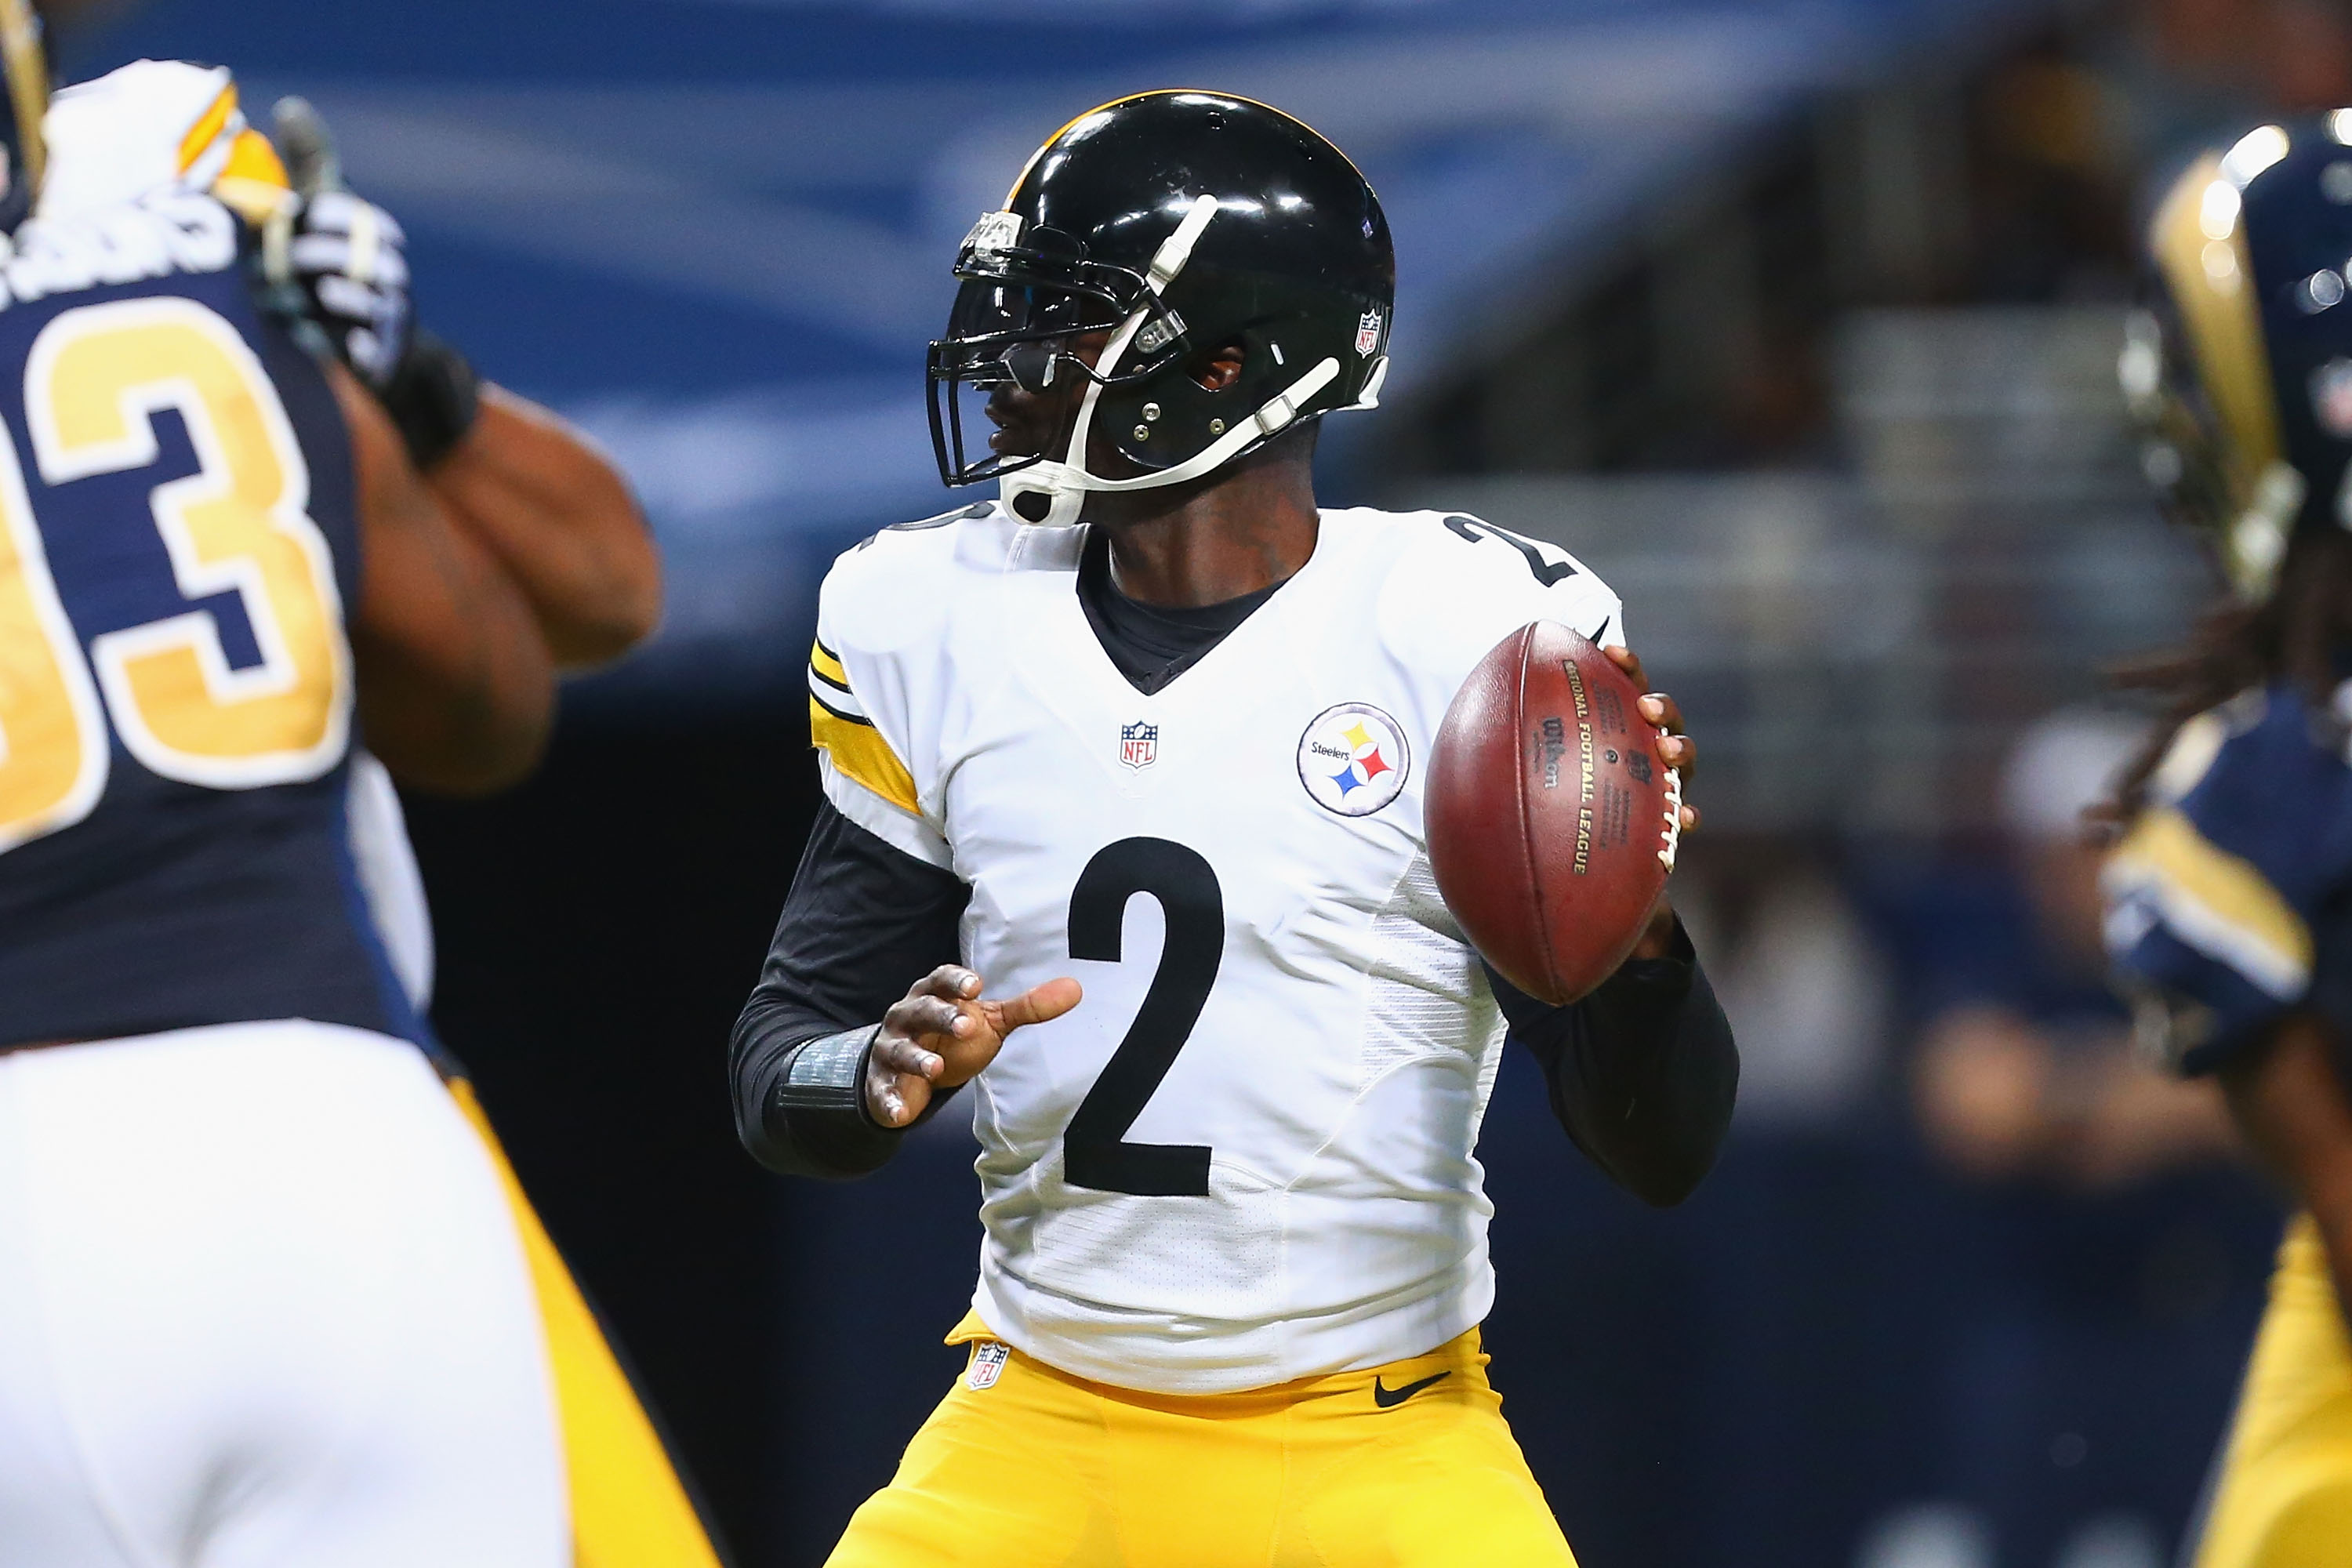 Michael Vick will likely start at QB for the Steelers on Thursday (Getty).